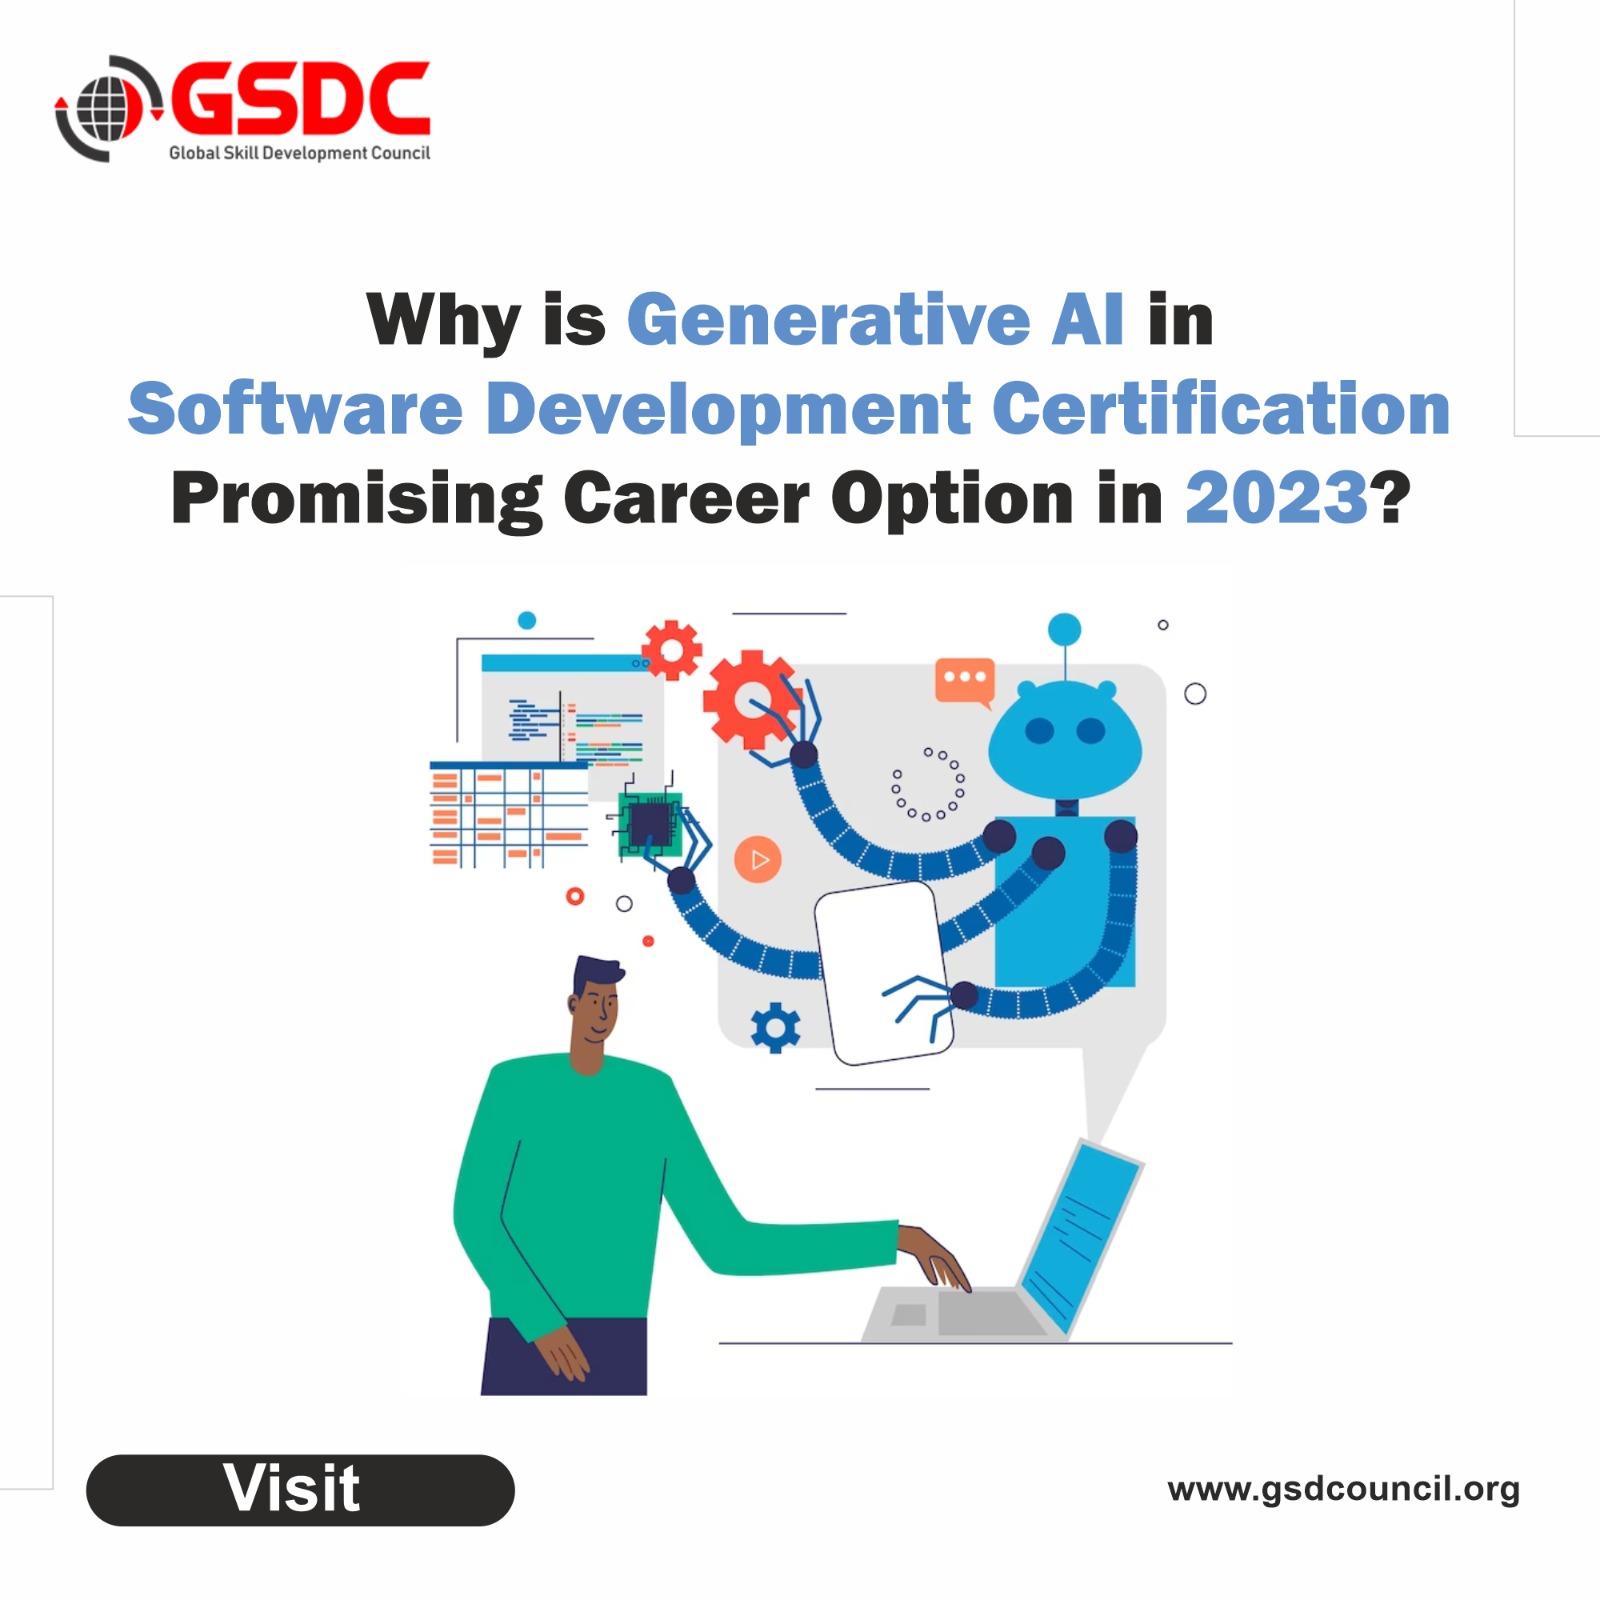 Why is Generative AI in Software Development Certification Promising Career Option in 2023?